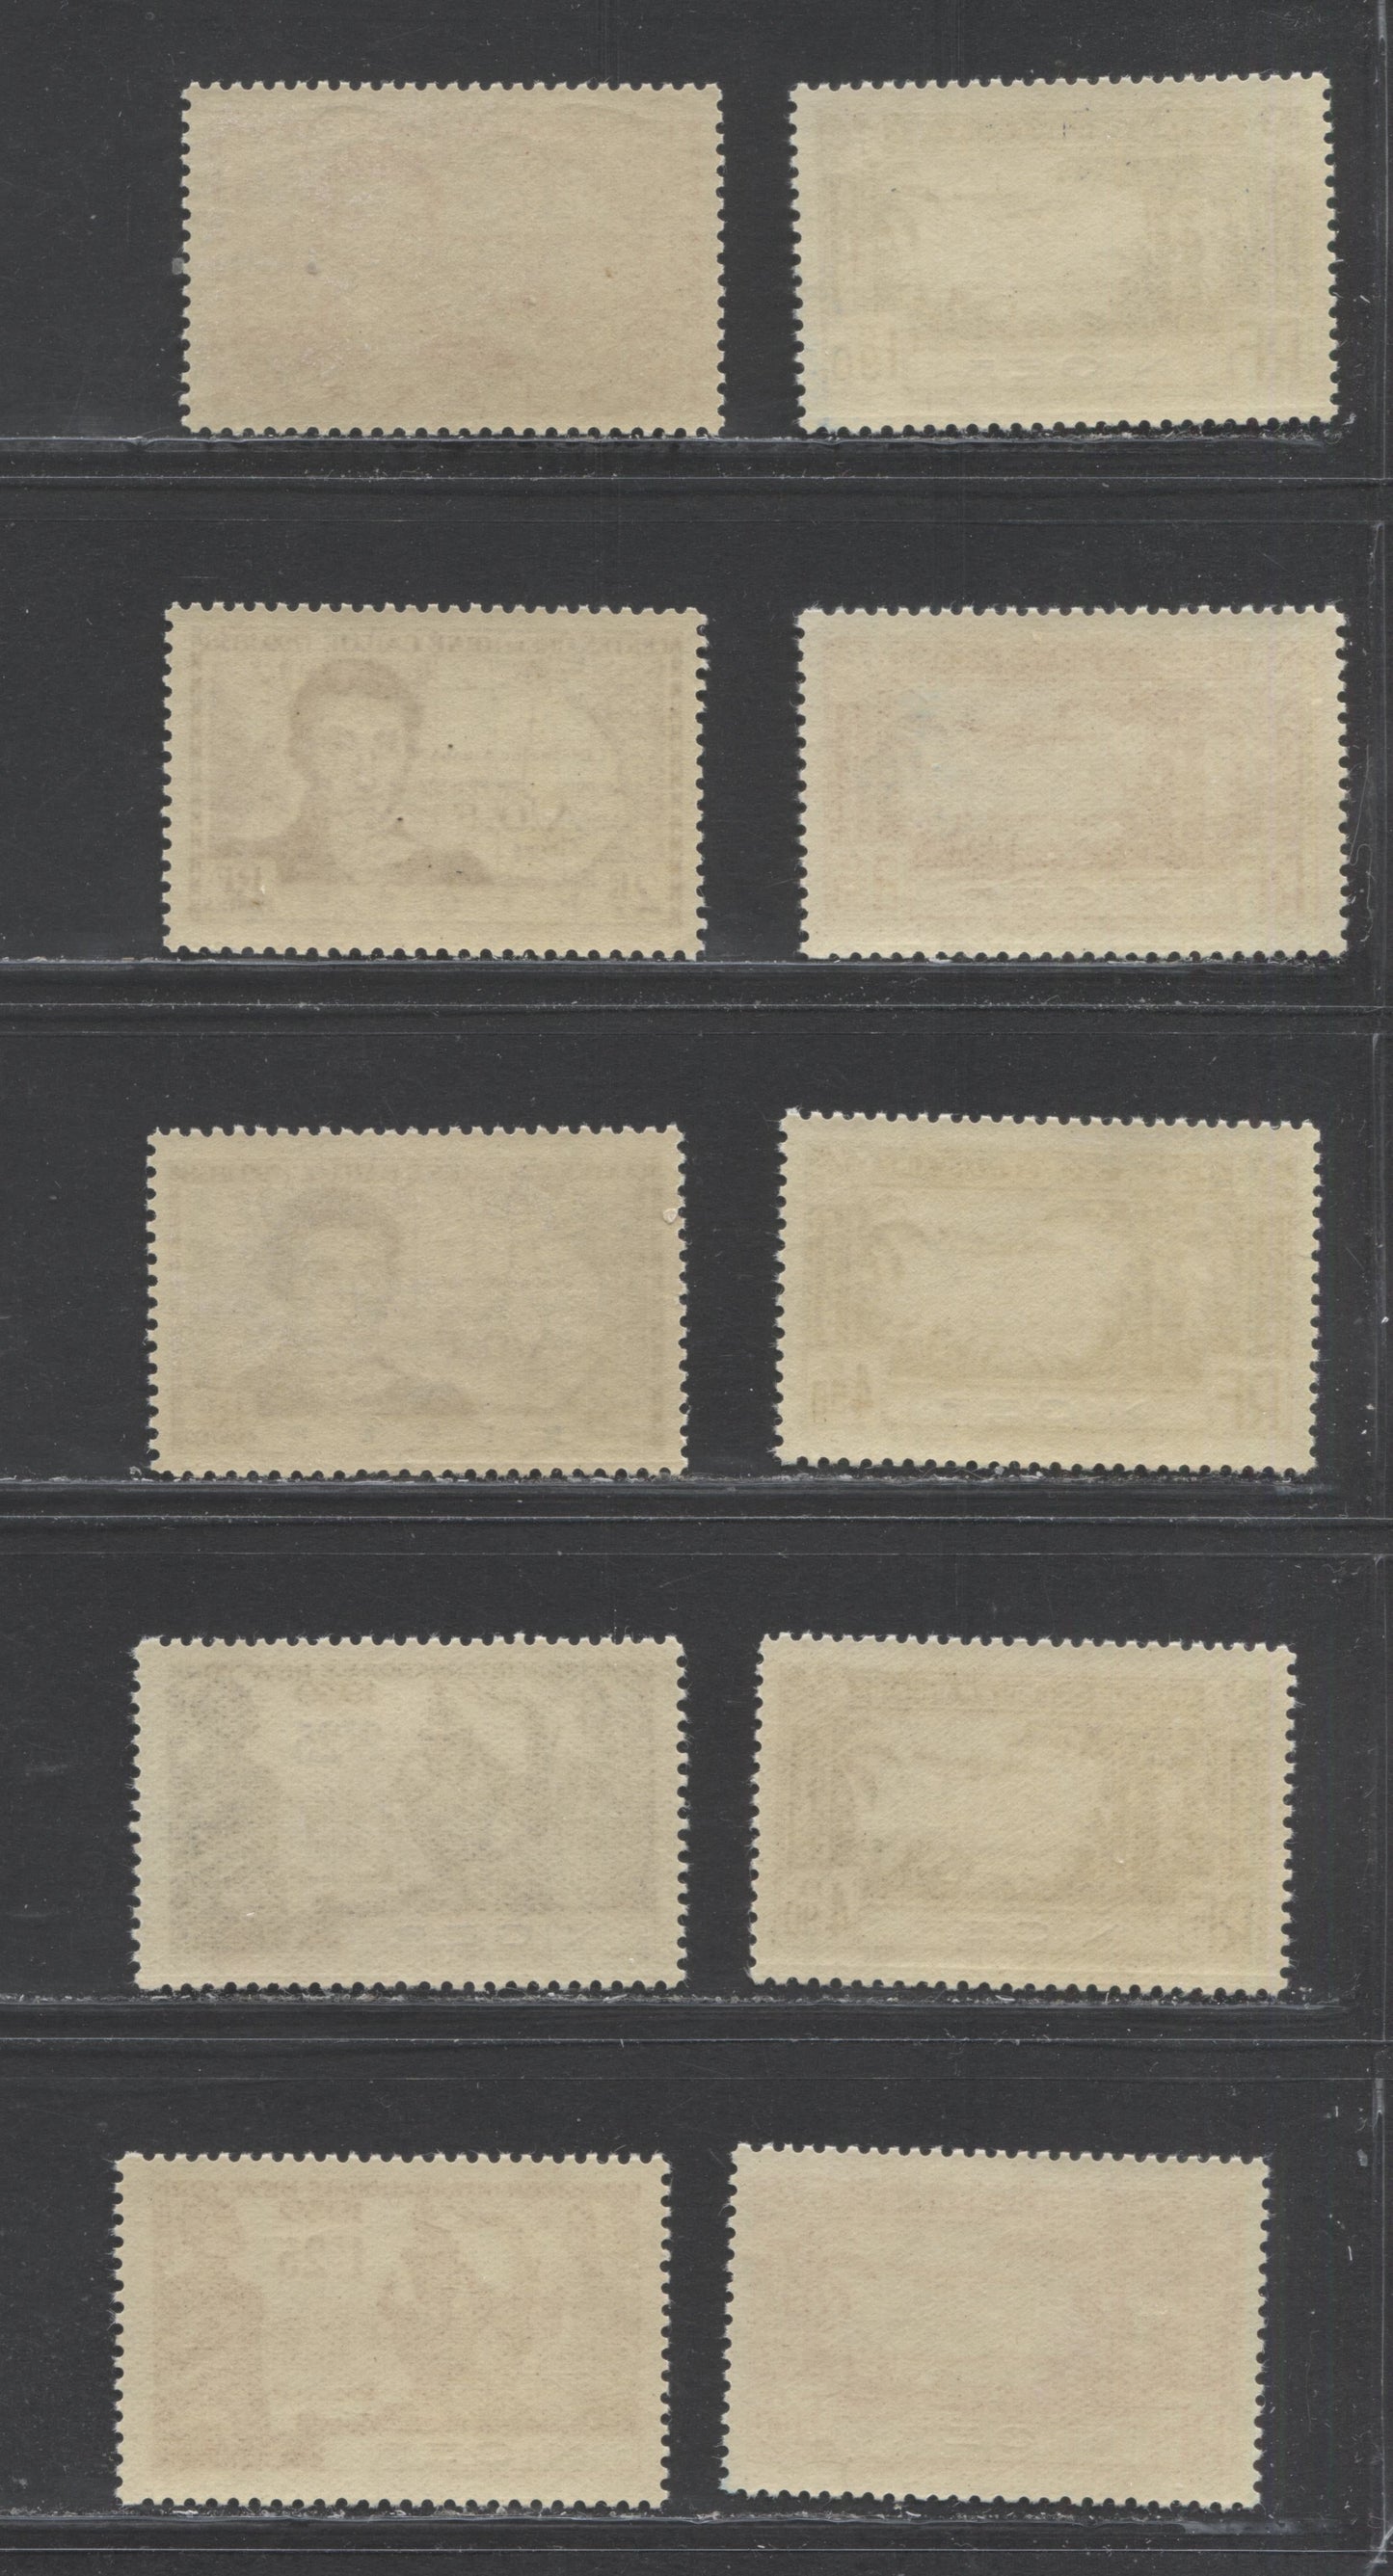 Lot 153 Niger SC#84/C5 1939 Calille and New York World's Fair Issues, A VFNH and VFLH Range Of Singles, 2017 Scott Cat. $11.7 USD, Click on Listing to See ALL Pictures